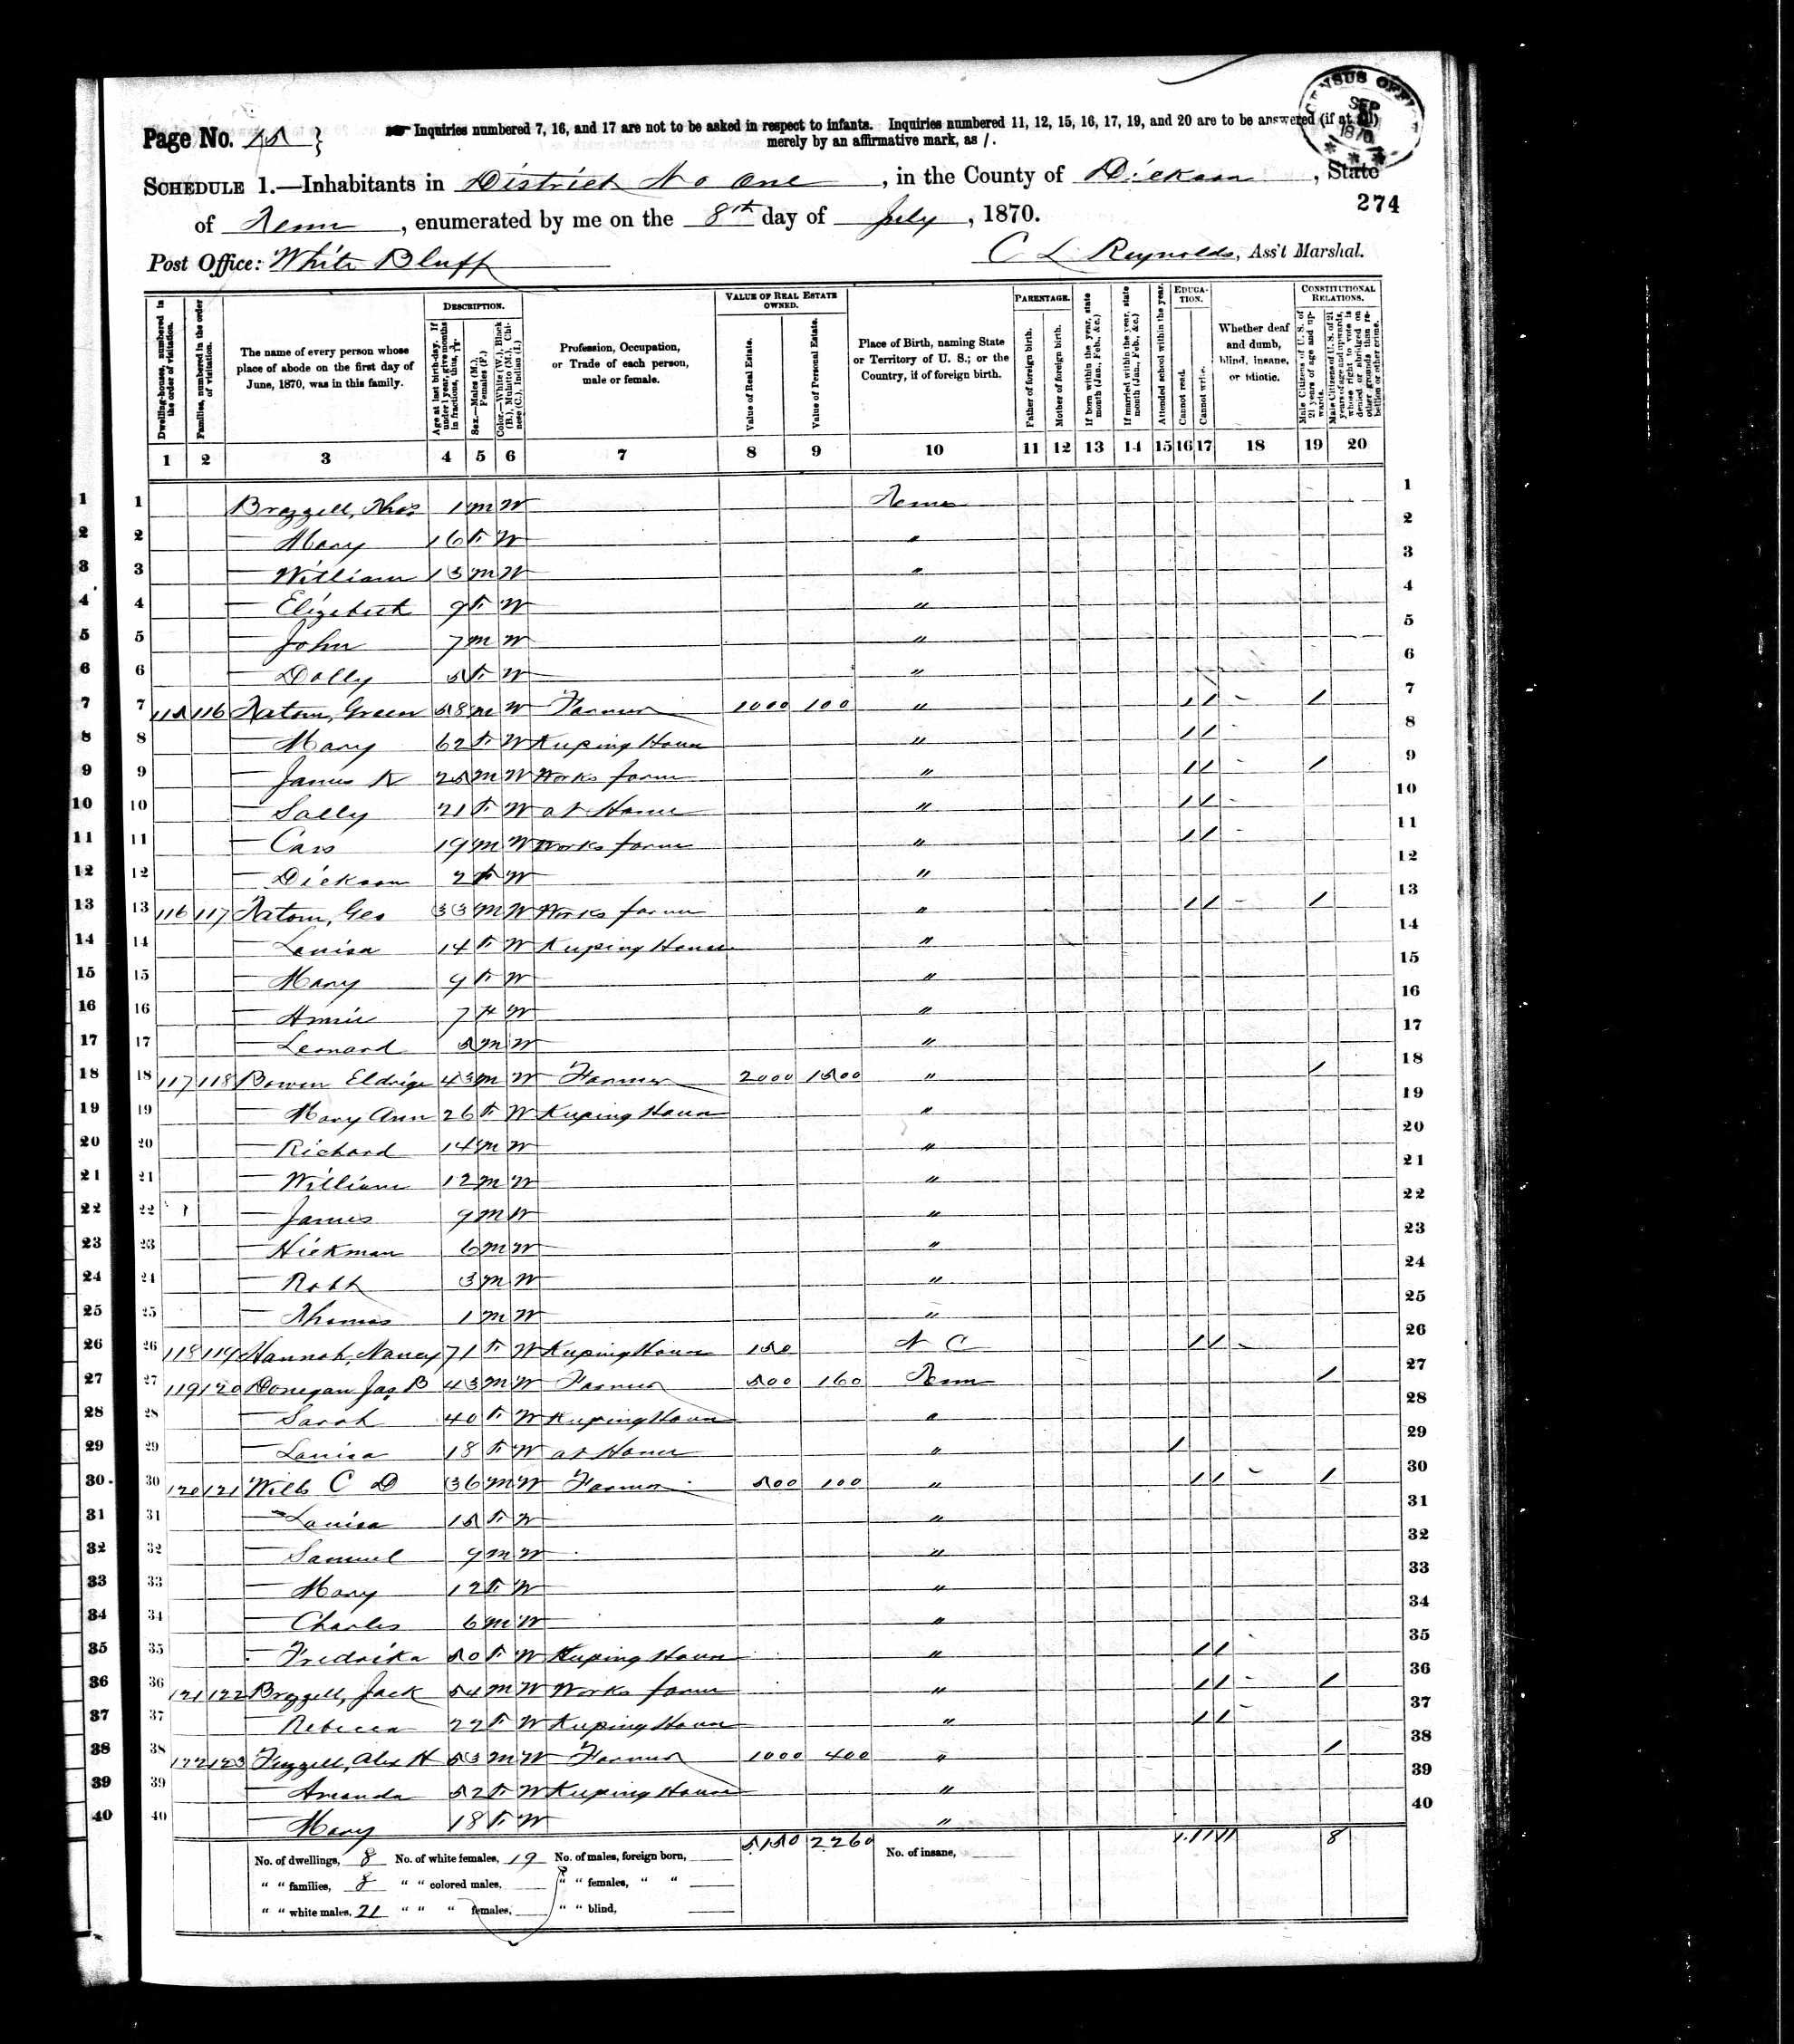 Jackson Brazzell, 1870 Dickson County, Tennessee, census